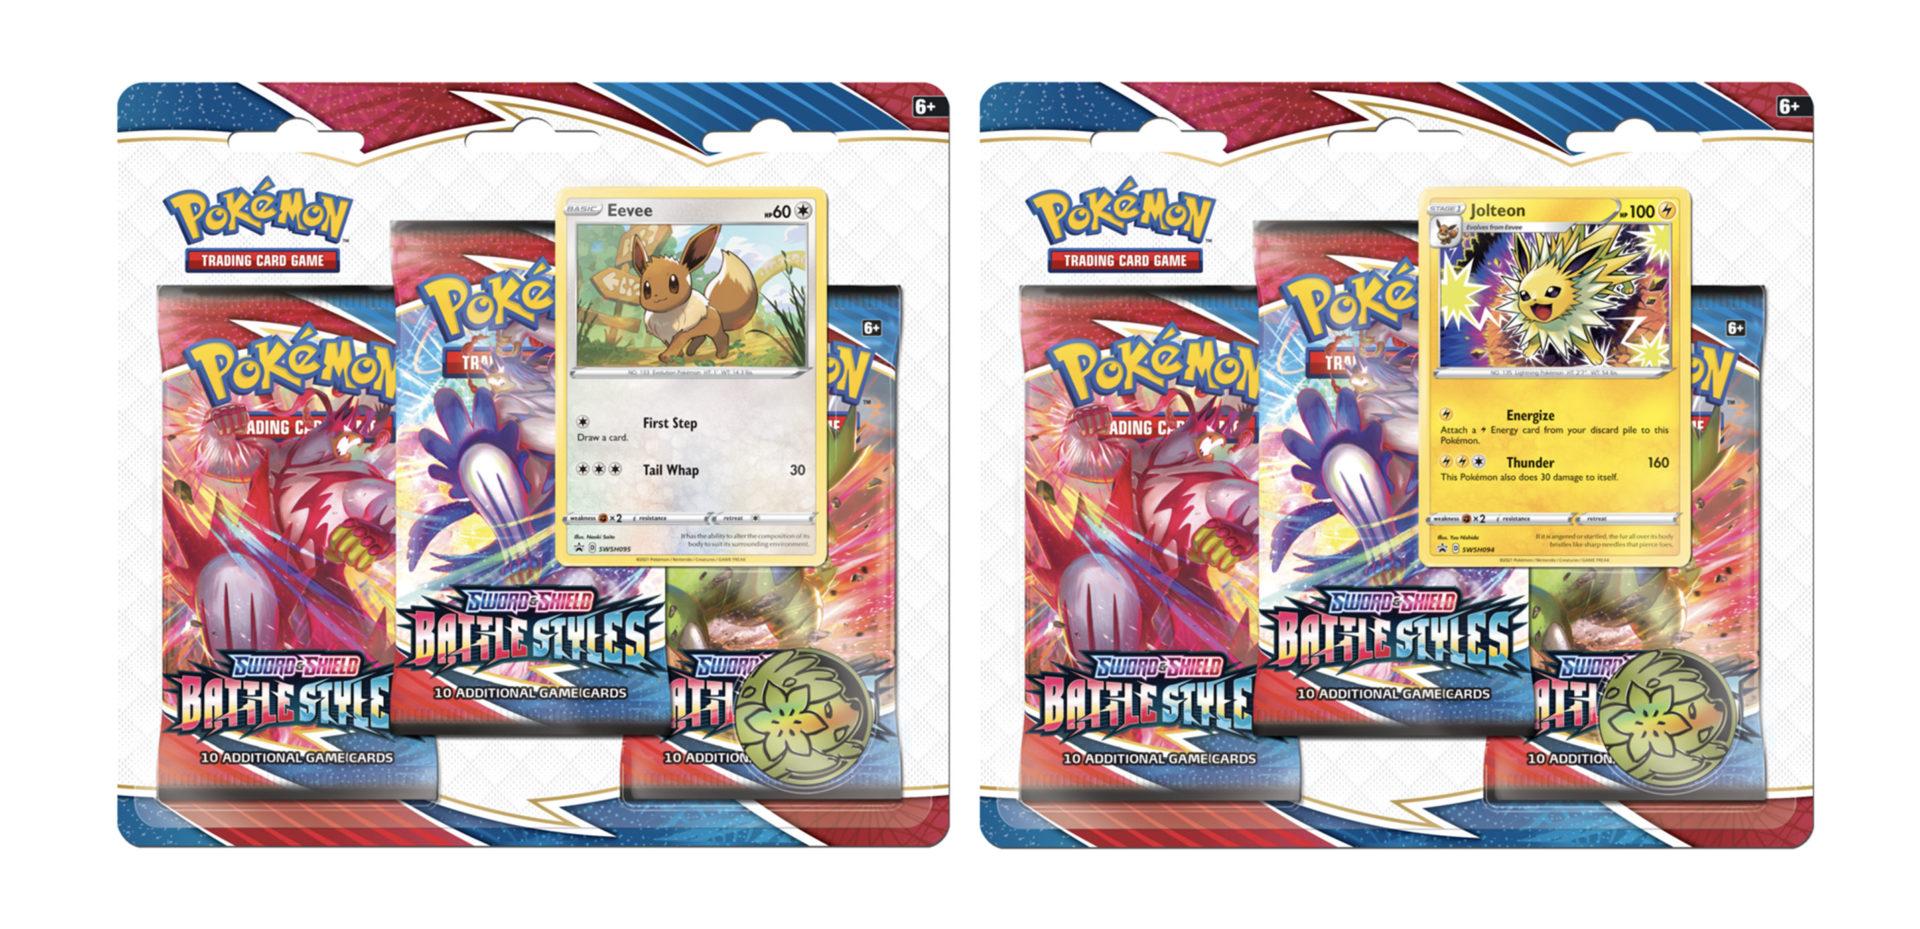 Screenshot of Pokemon TCG Battle Styles expansion blister pack featuring Eevee & Jolteon promo.